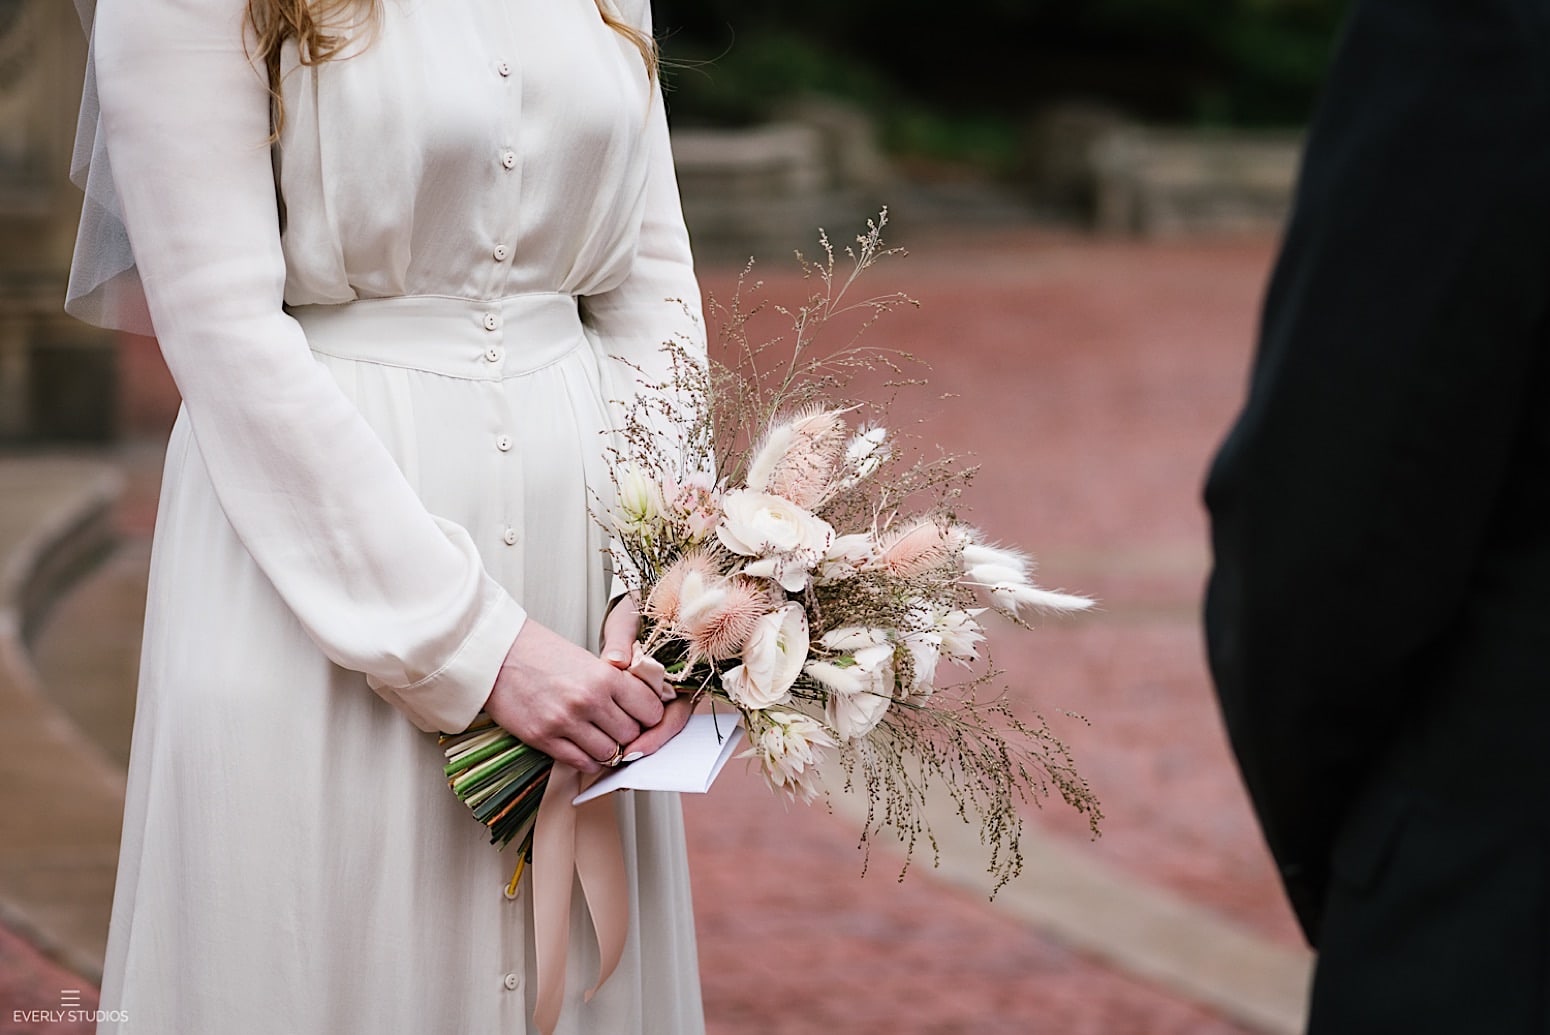 Bethesda Fountain elopement in Central Park NYC